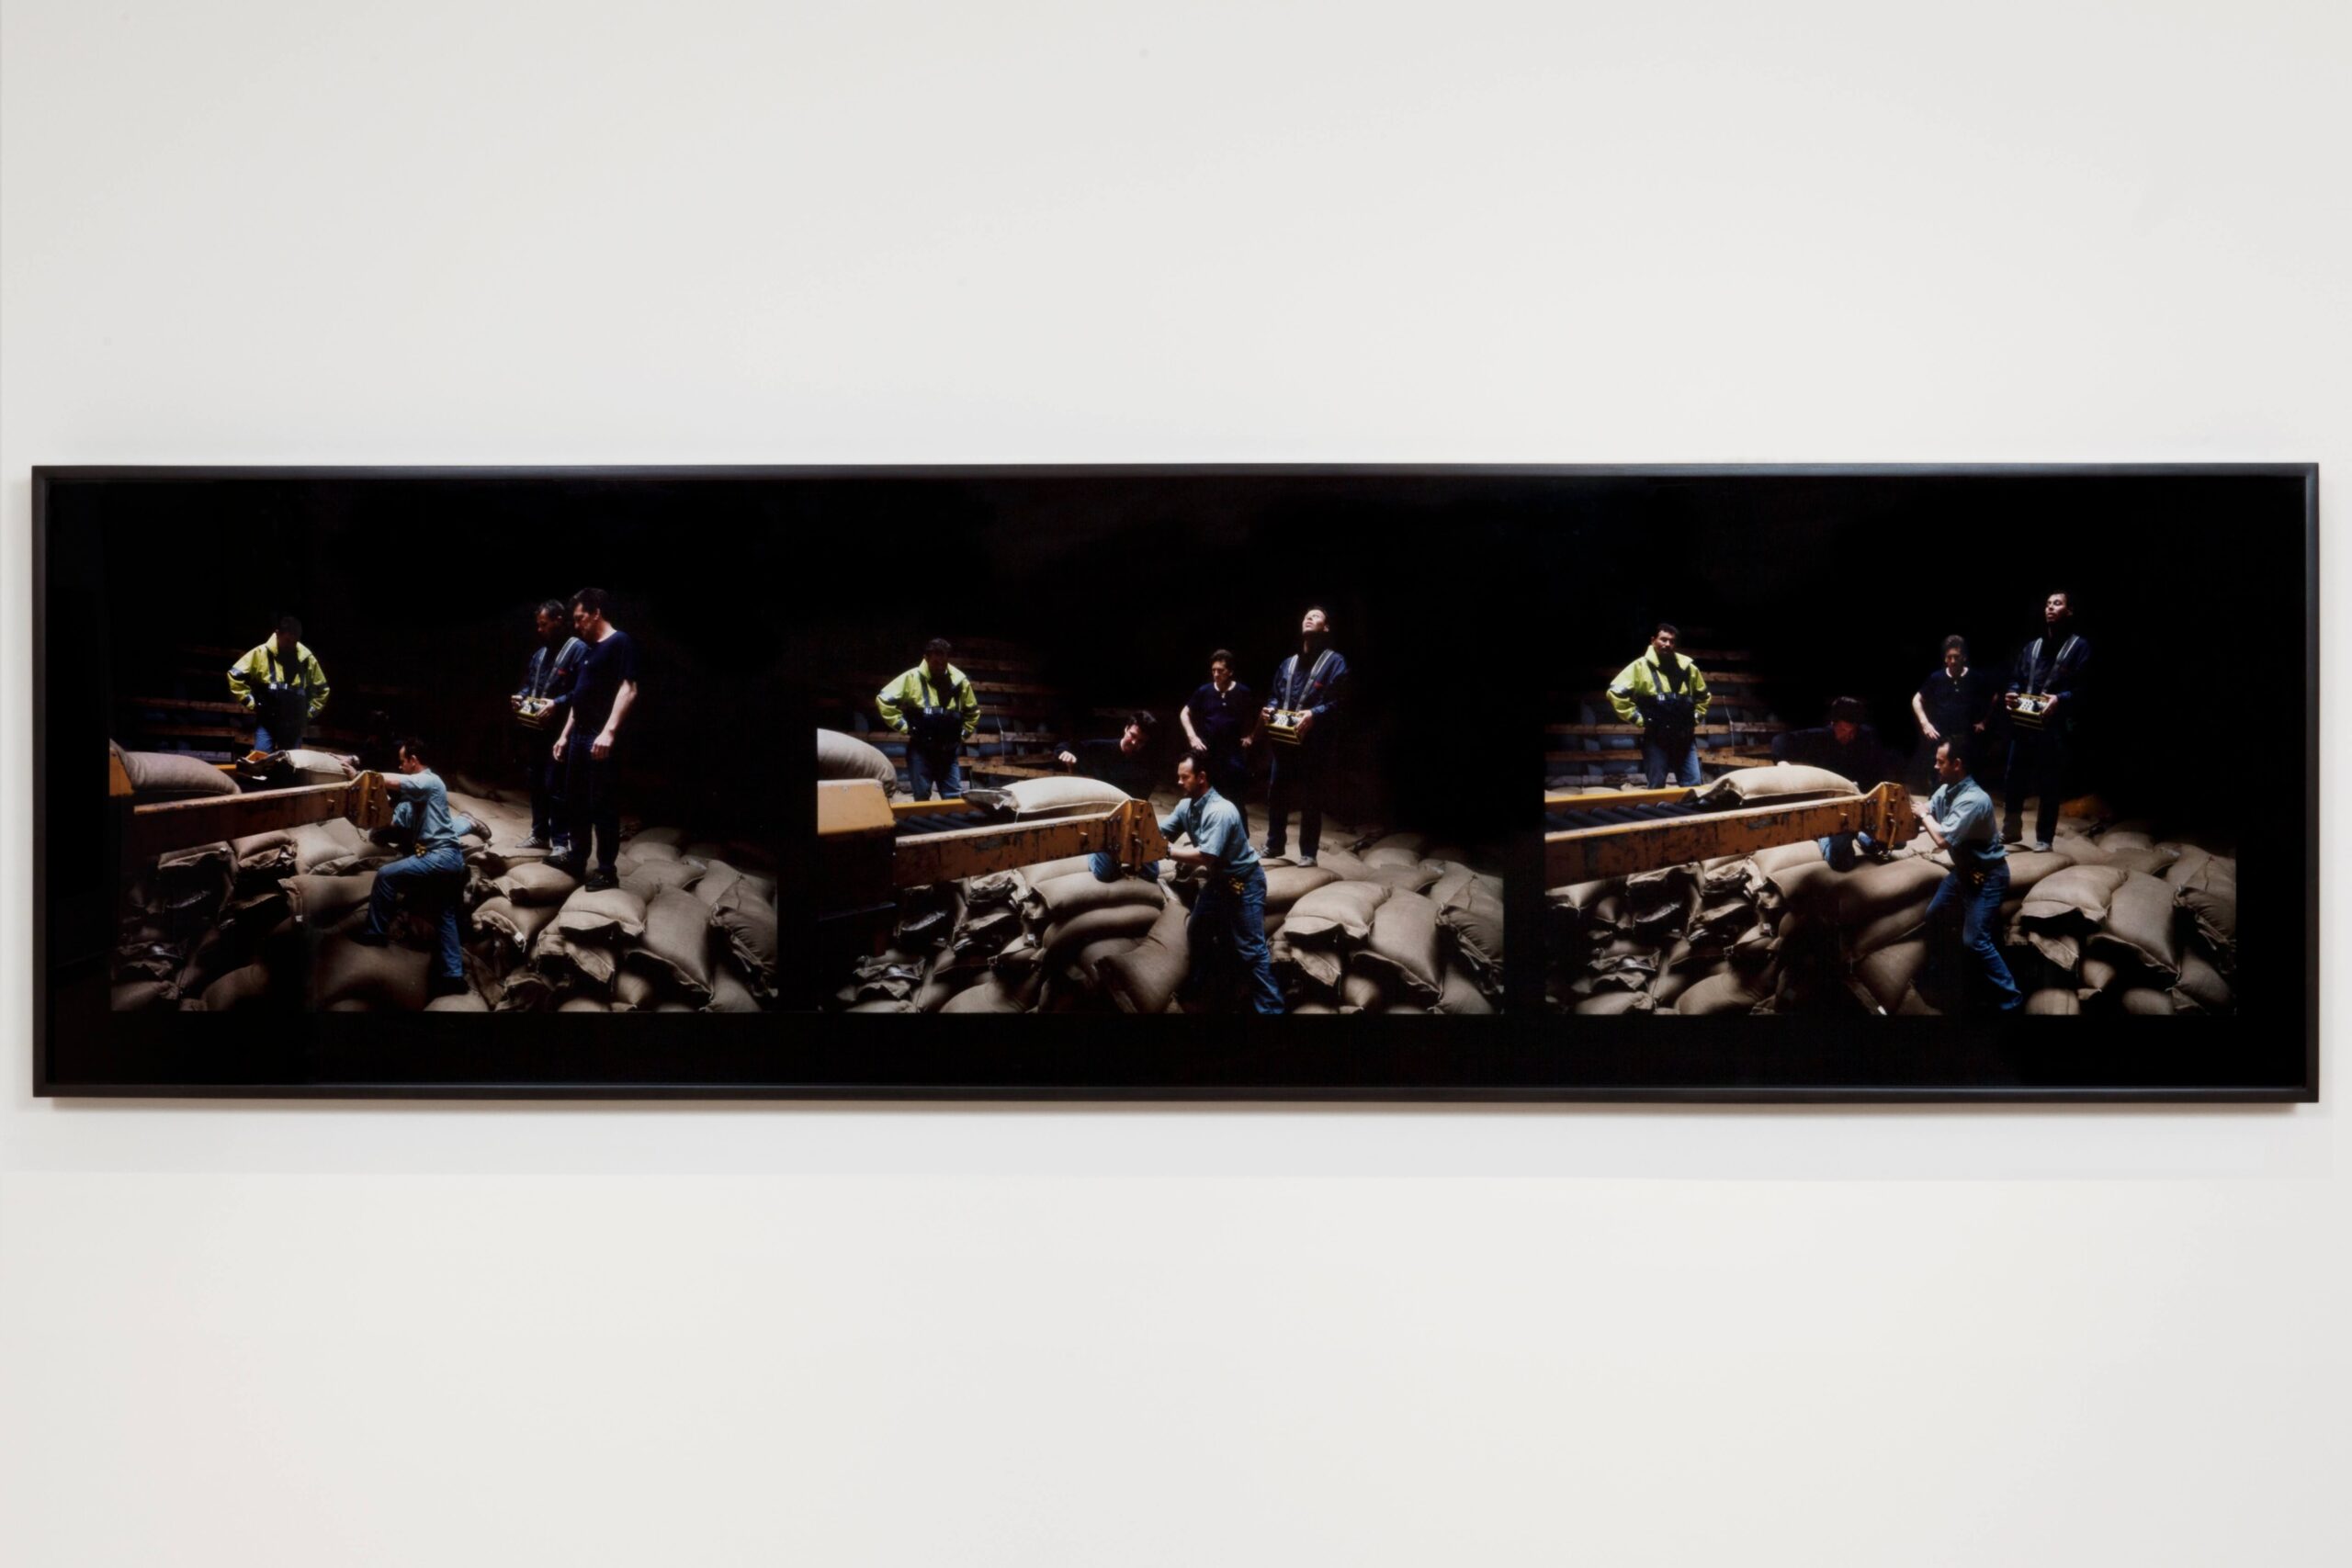 Image of artwork Dockers Loading Sugar Ship, Calais from the series “Deep Six, or Social Work Seen from a Ferry” by Allan Sekula